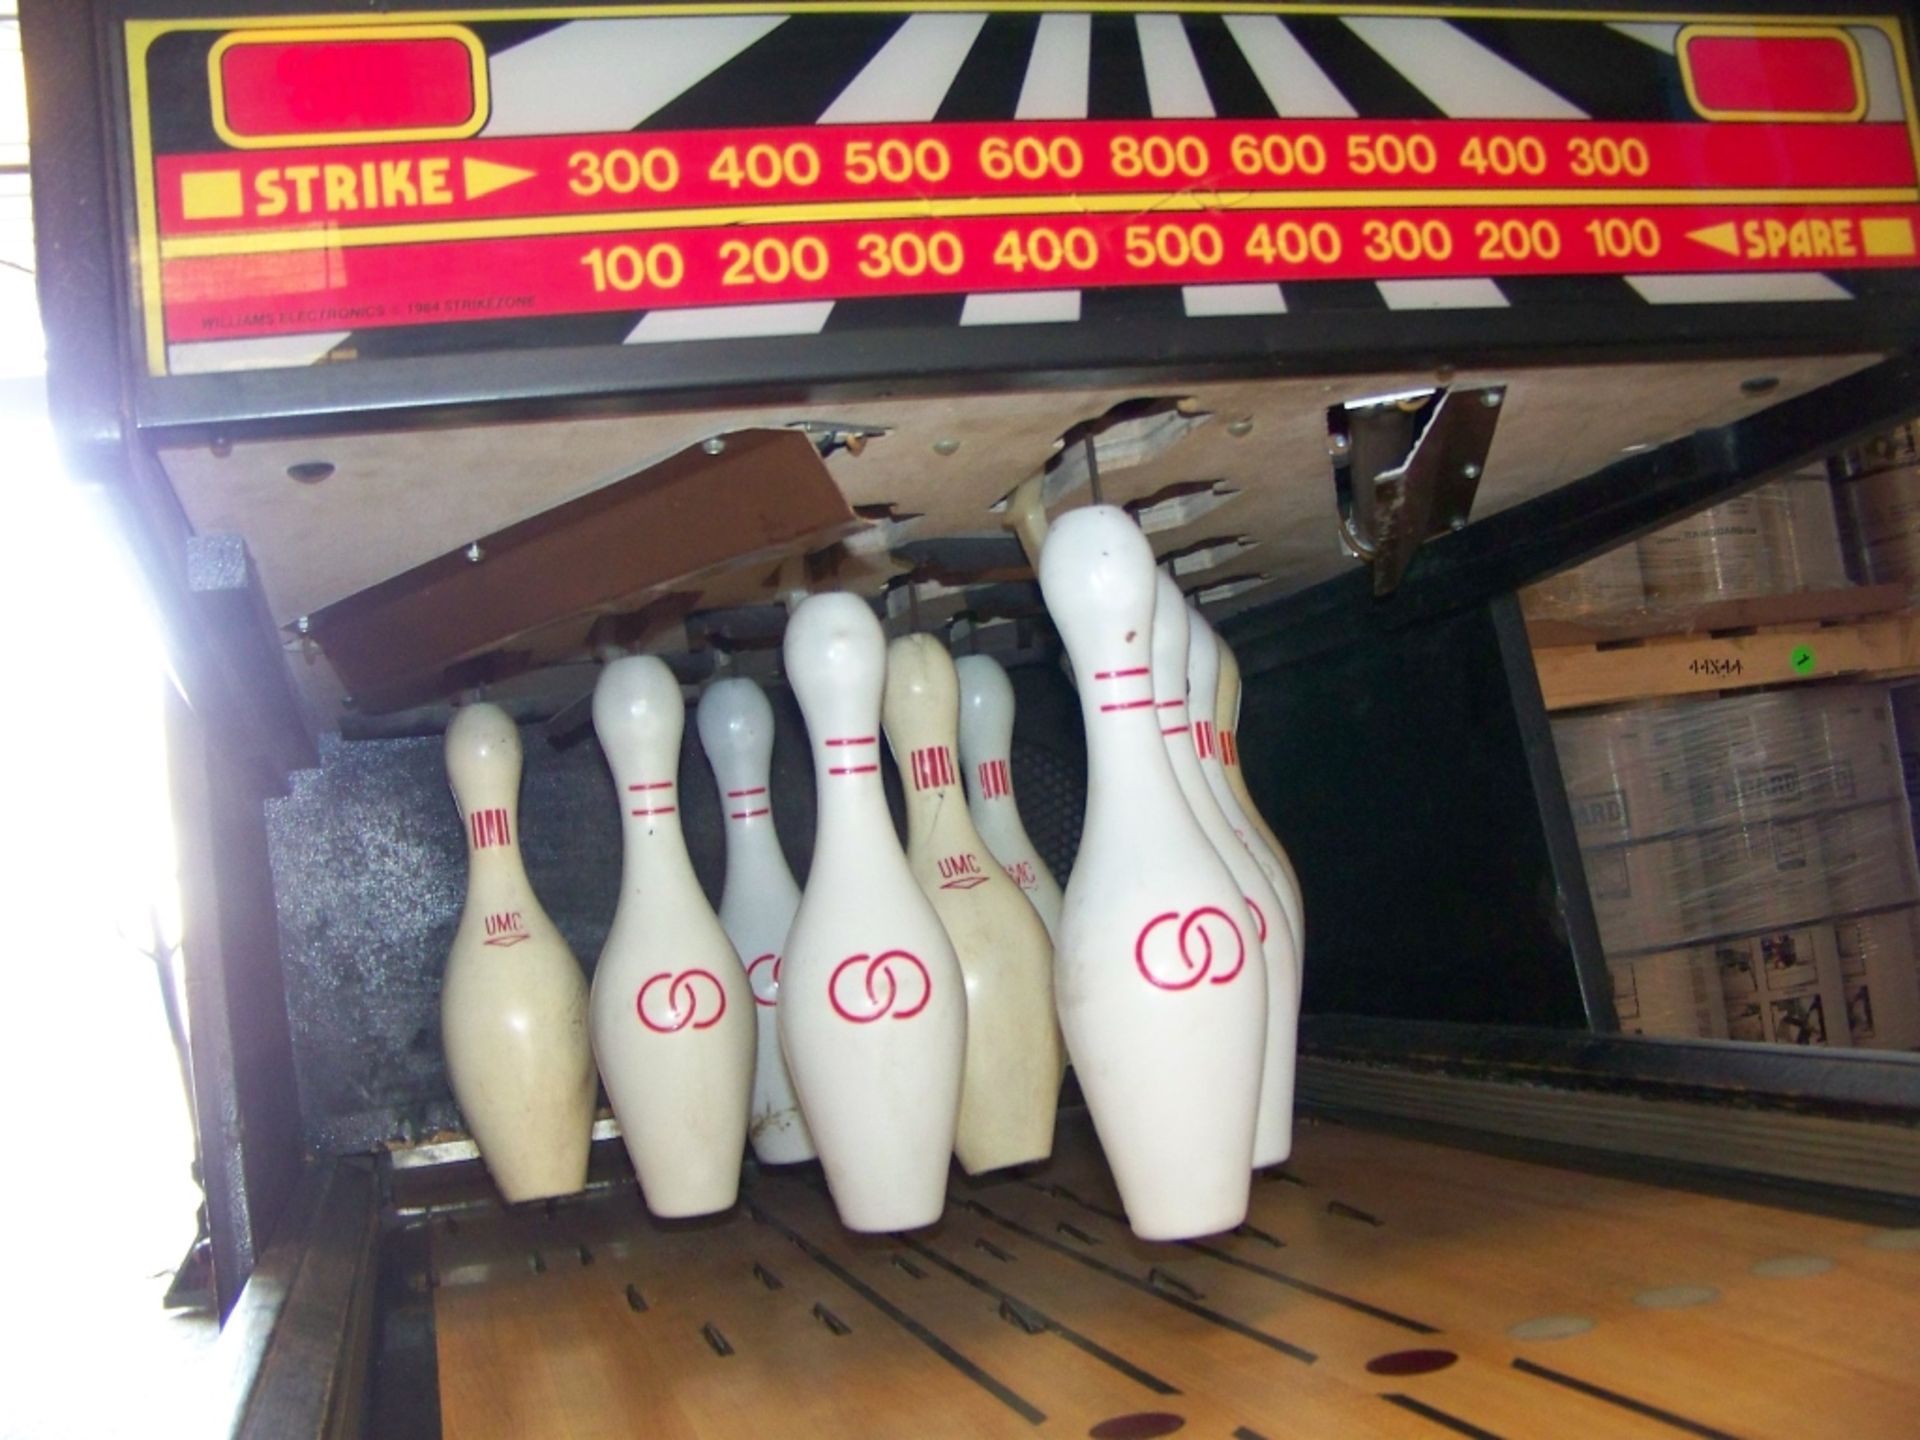 UNITED'S STRIKE ZONE SHUFFLE BOWLING ALLEY - Image 5 of 7